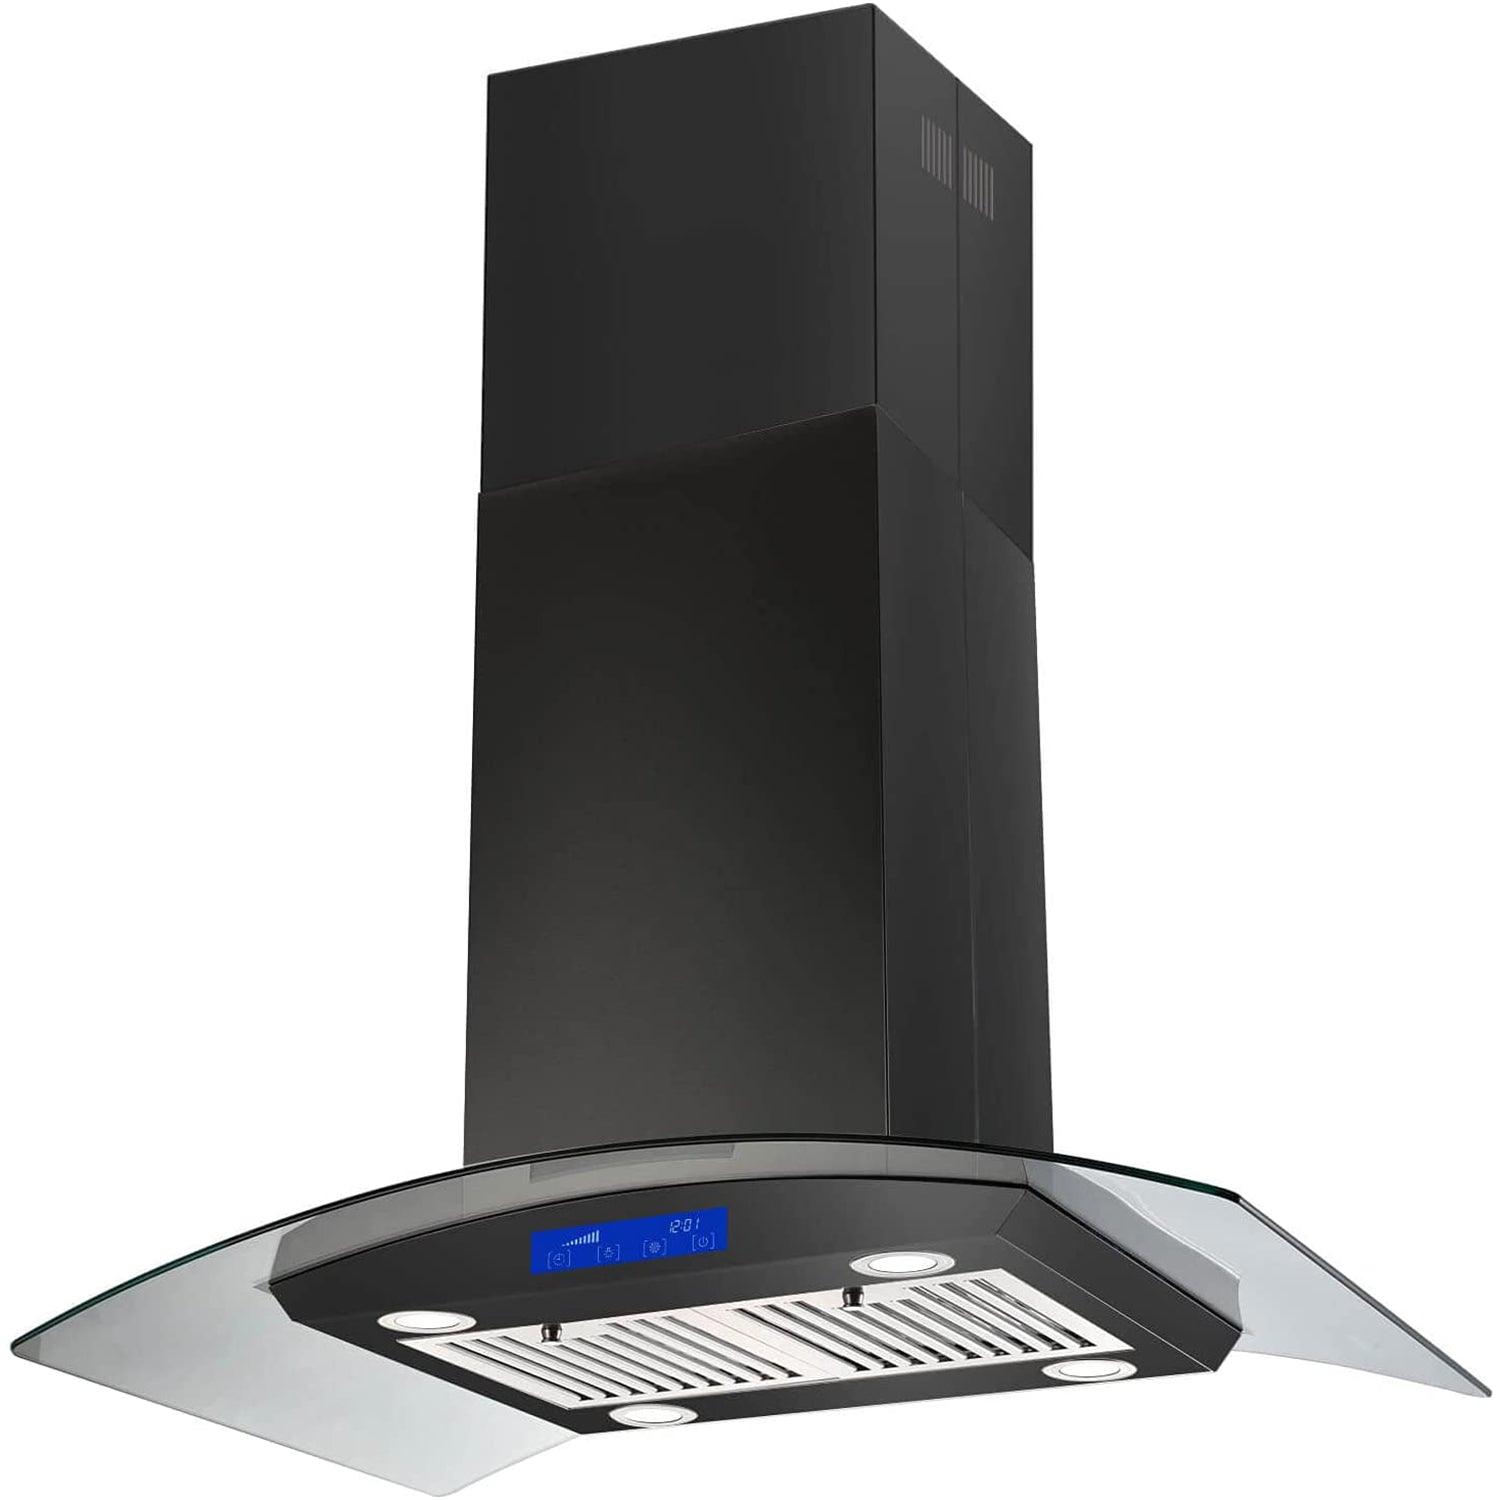 BlueStar SC036MLPLT 36 Inch Wall Mount Range Hood with 3-Speed Boost, 600  CFM Blower, Push-Button Controls, Dimmable LED Lighting, Stainless Steel  Baffle Filters, Multi-Stage Grease Capture System, and 1000+ Color Options:  Brushed